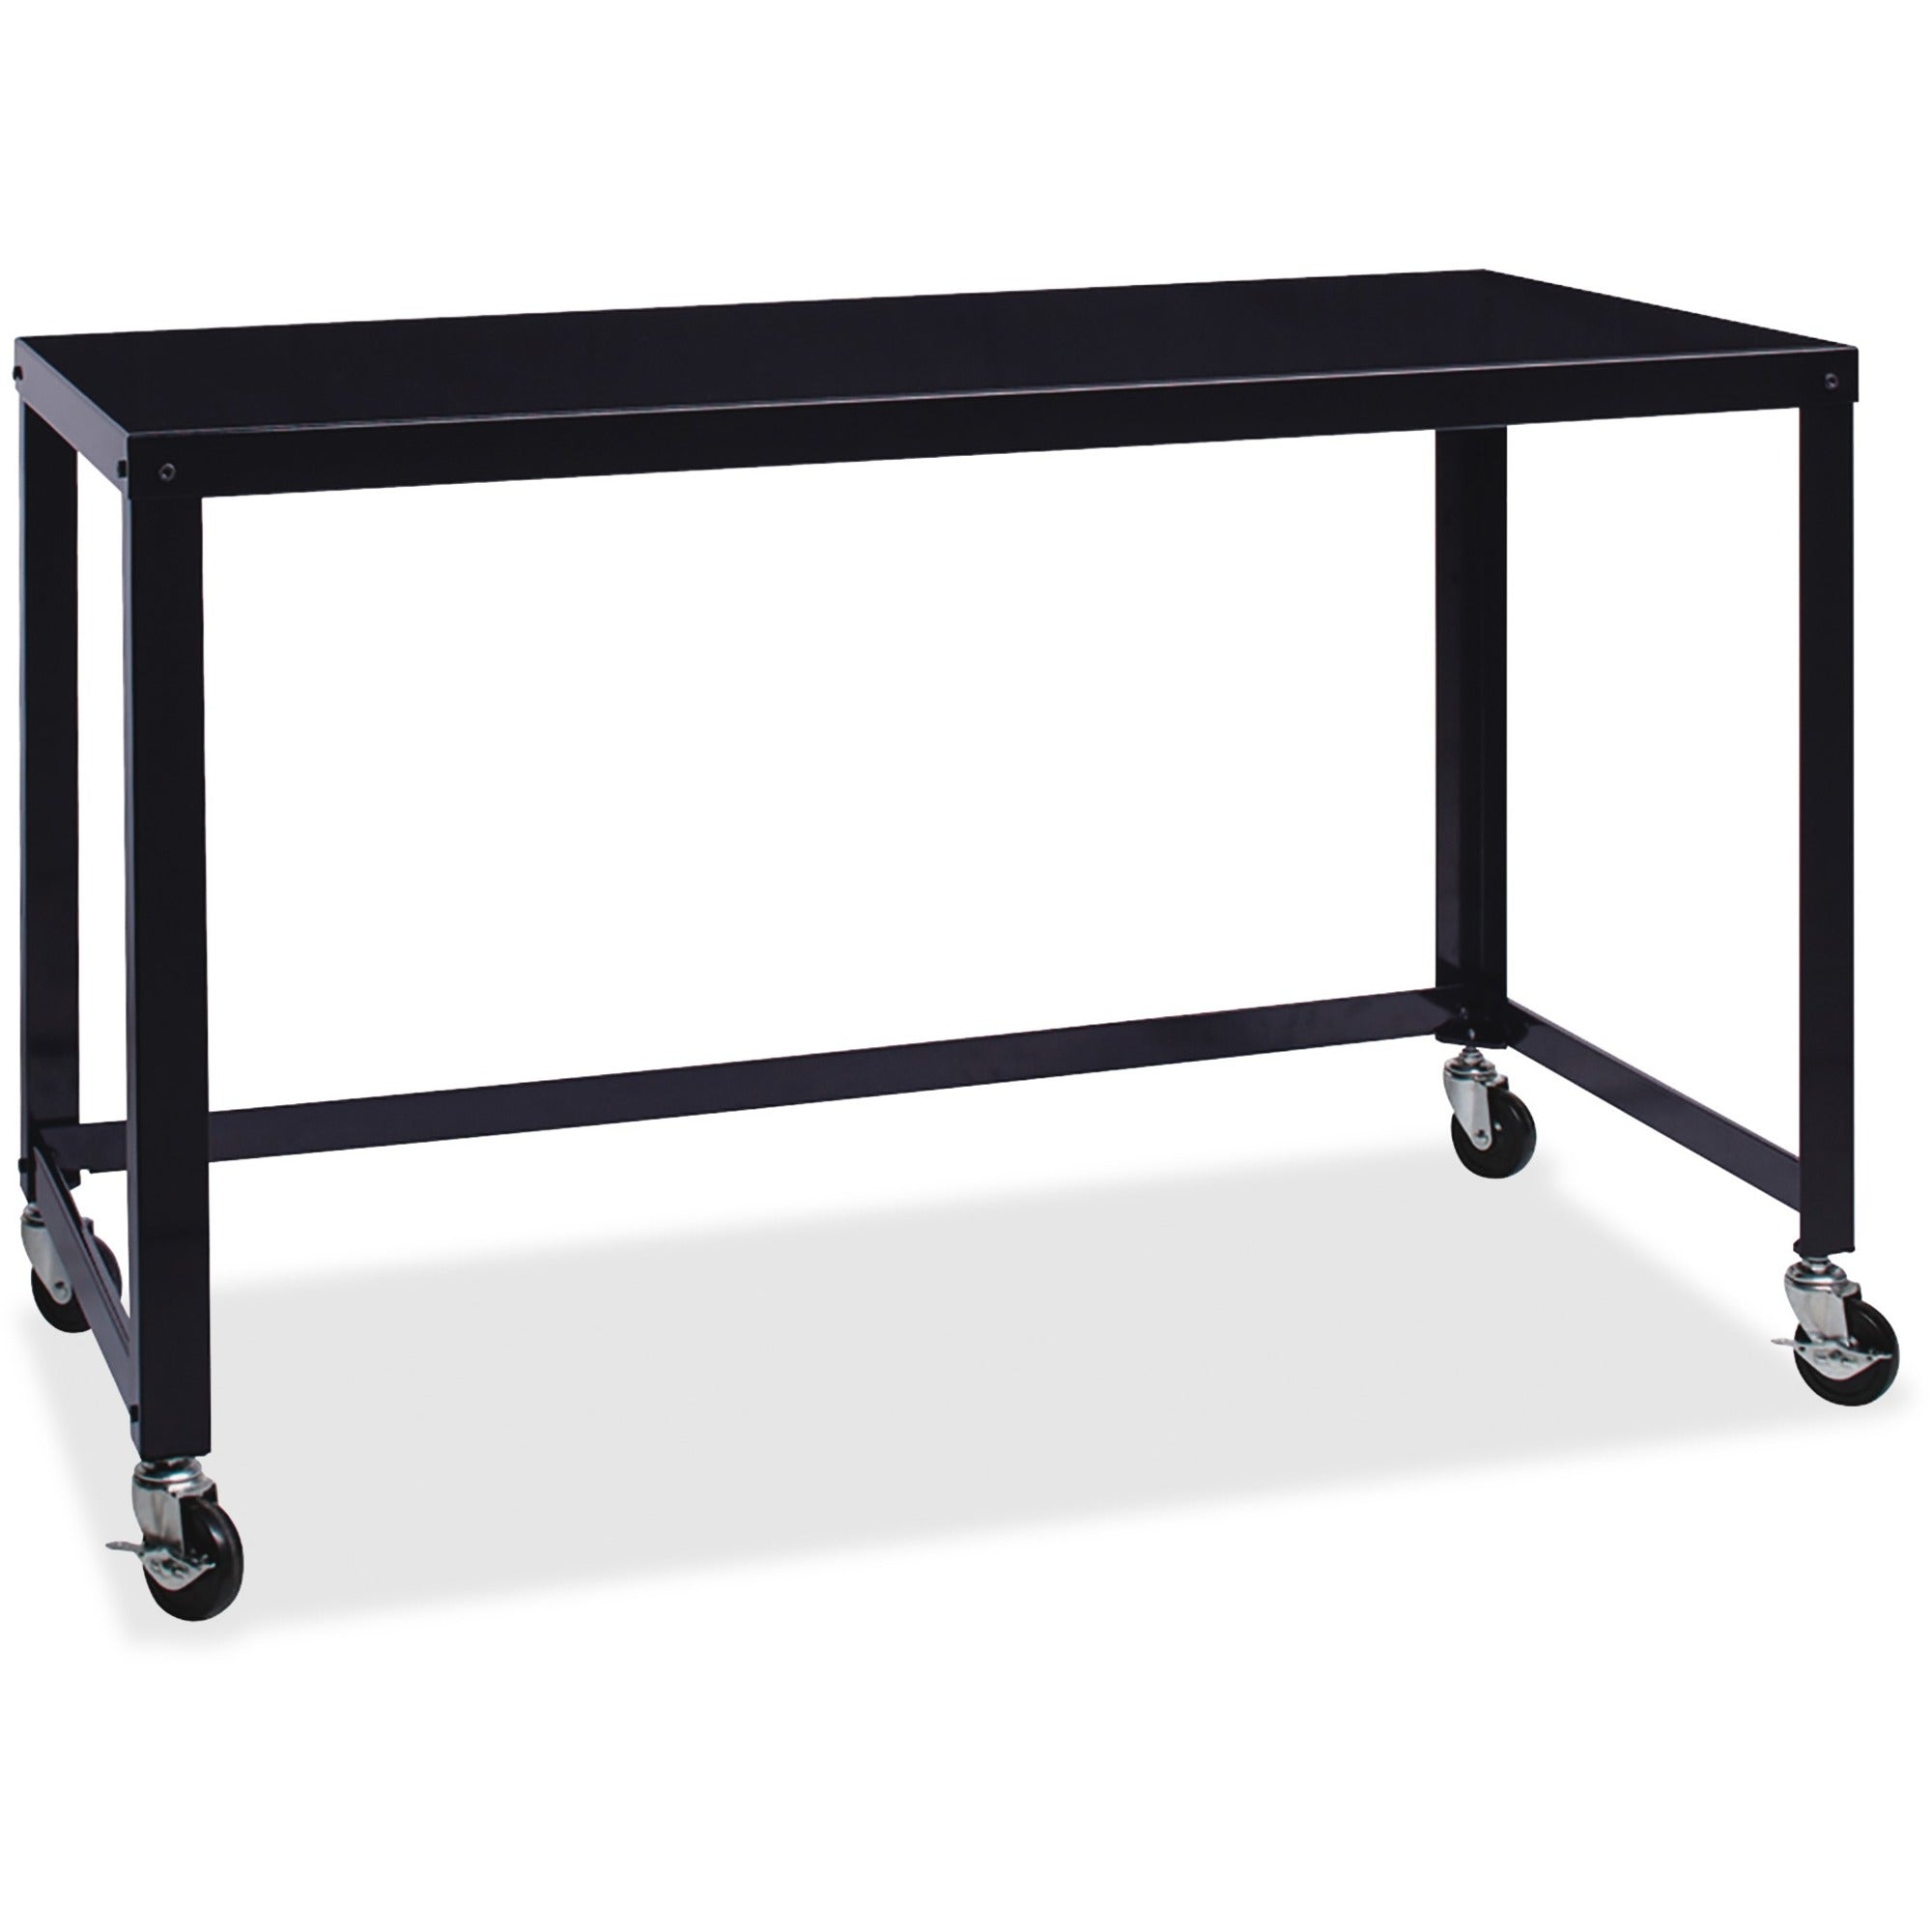 lorell-soho-personal-mobile-desk-for-table-toprectangle-top-x-48-table-top-width-x-23-table-top-depth-2950-height-assembly-required-black-1-each_llr34417 - 1